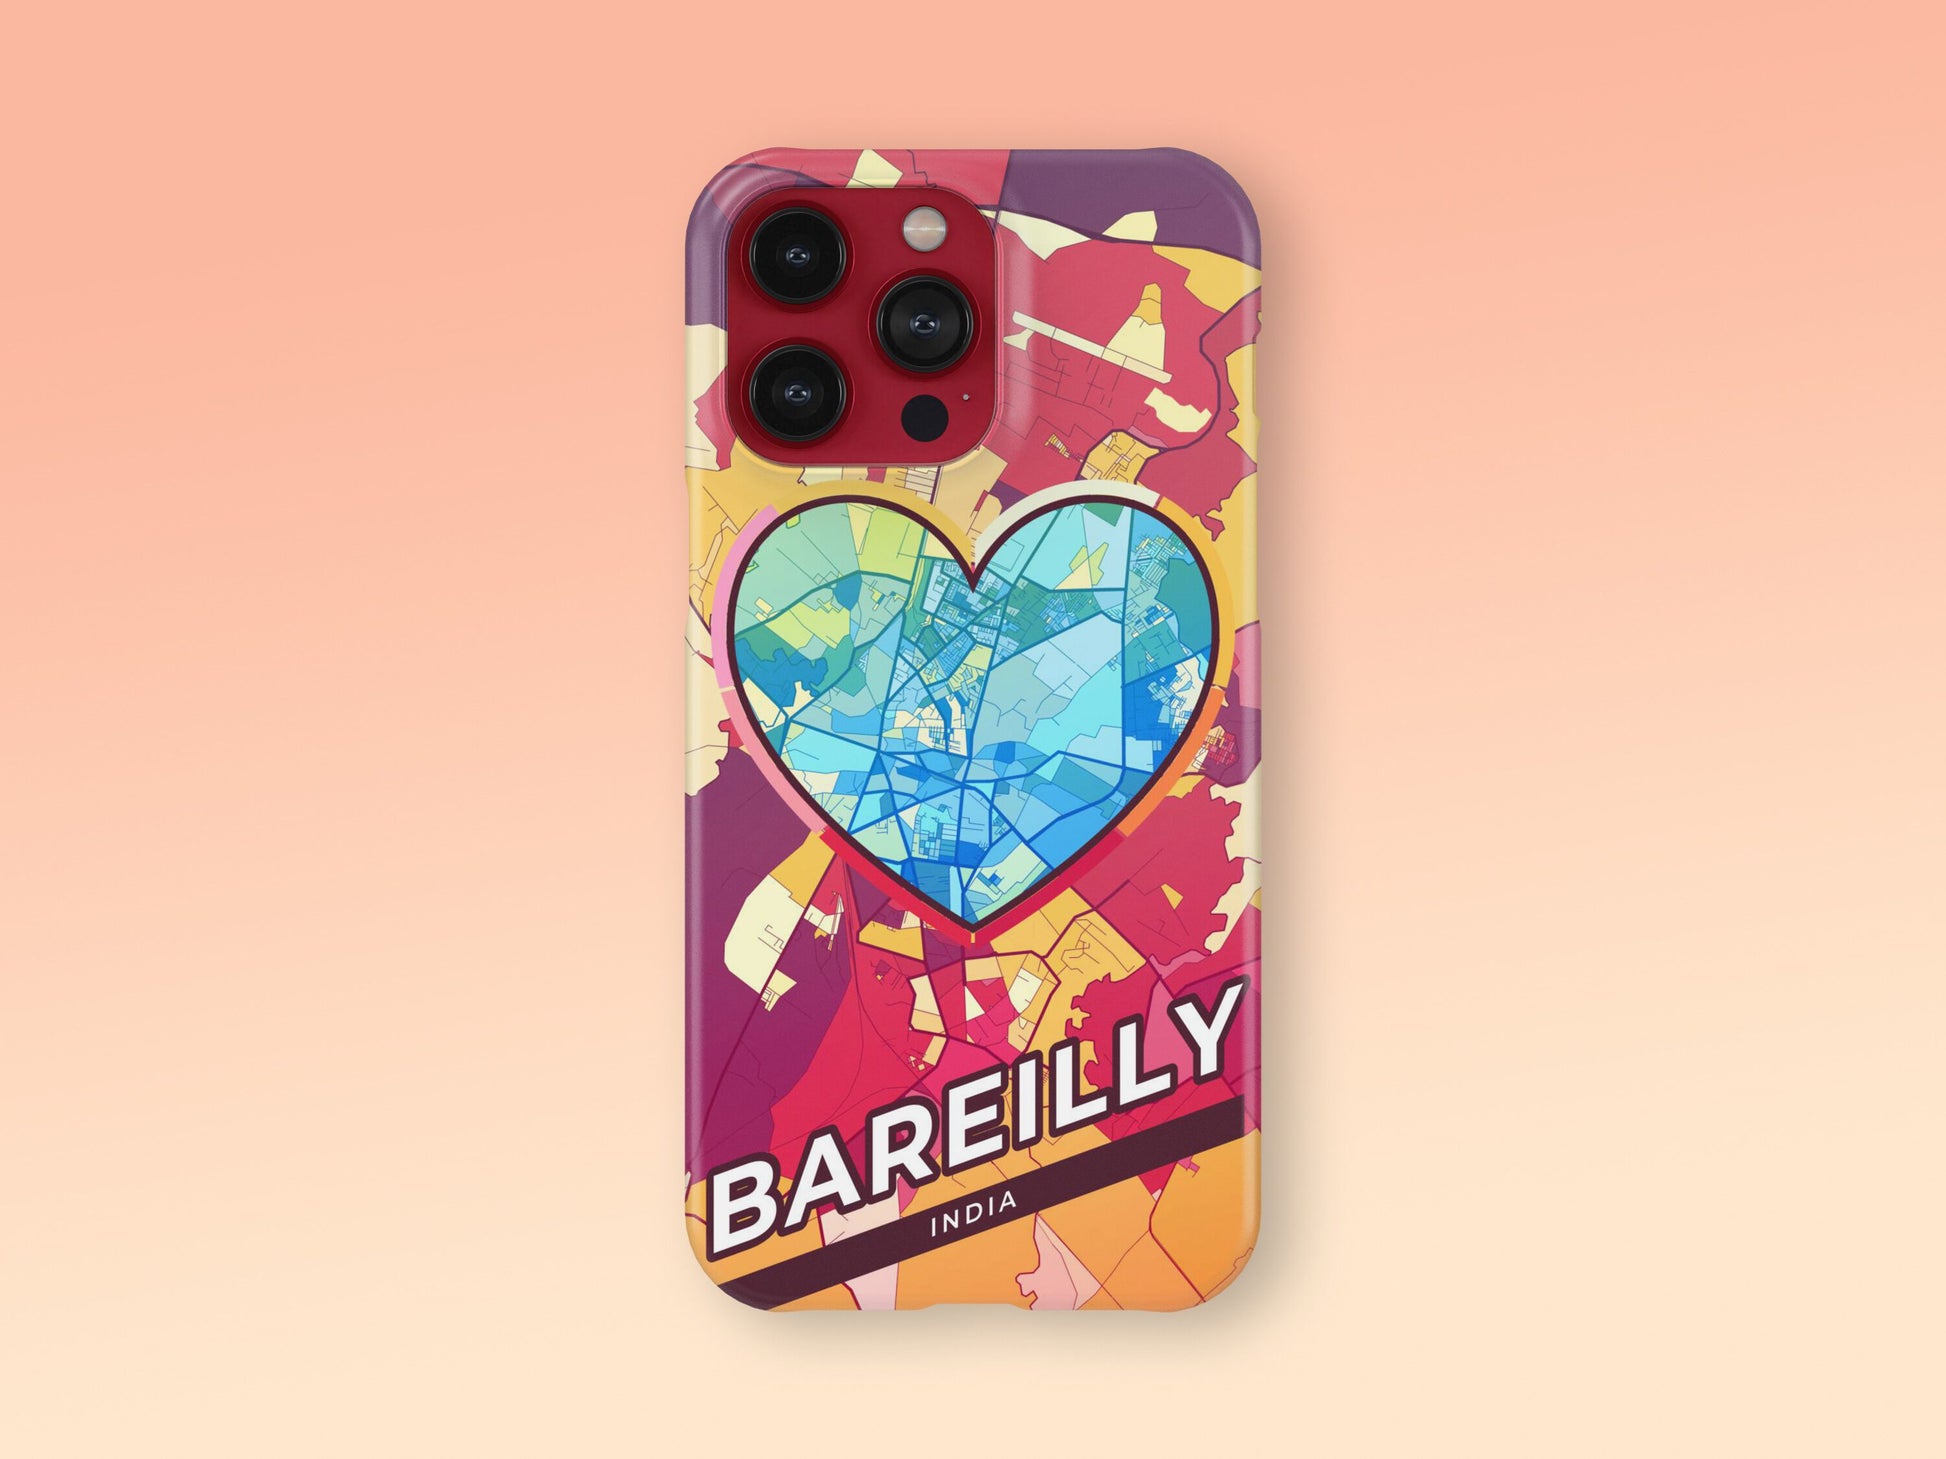 Bareilly India slim phone case with colorful icon. Birthday, wedding or housewarming gift. Couple match cases. 2